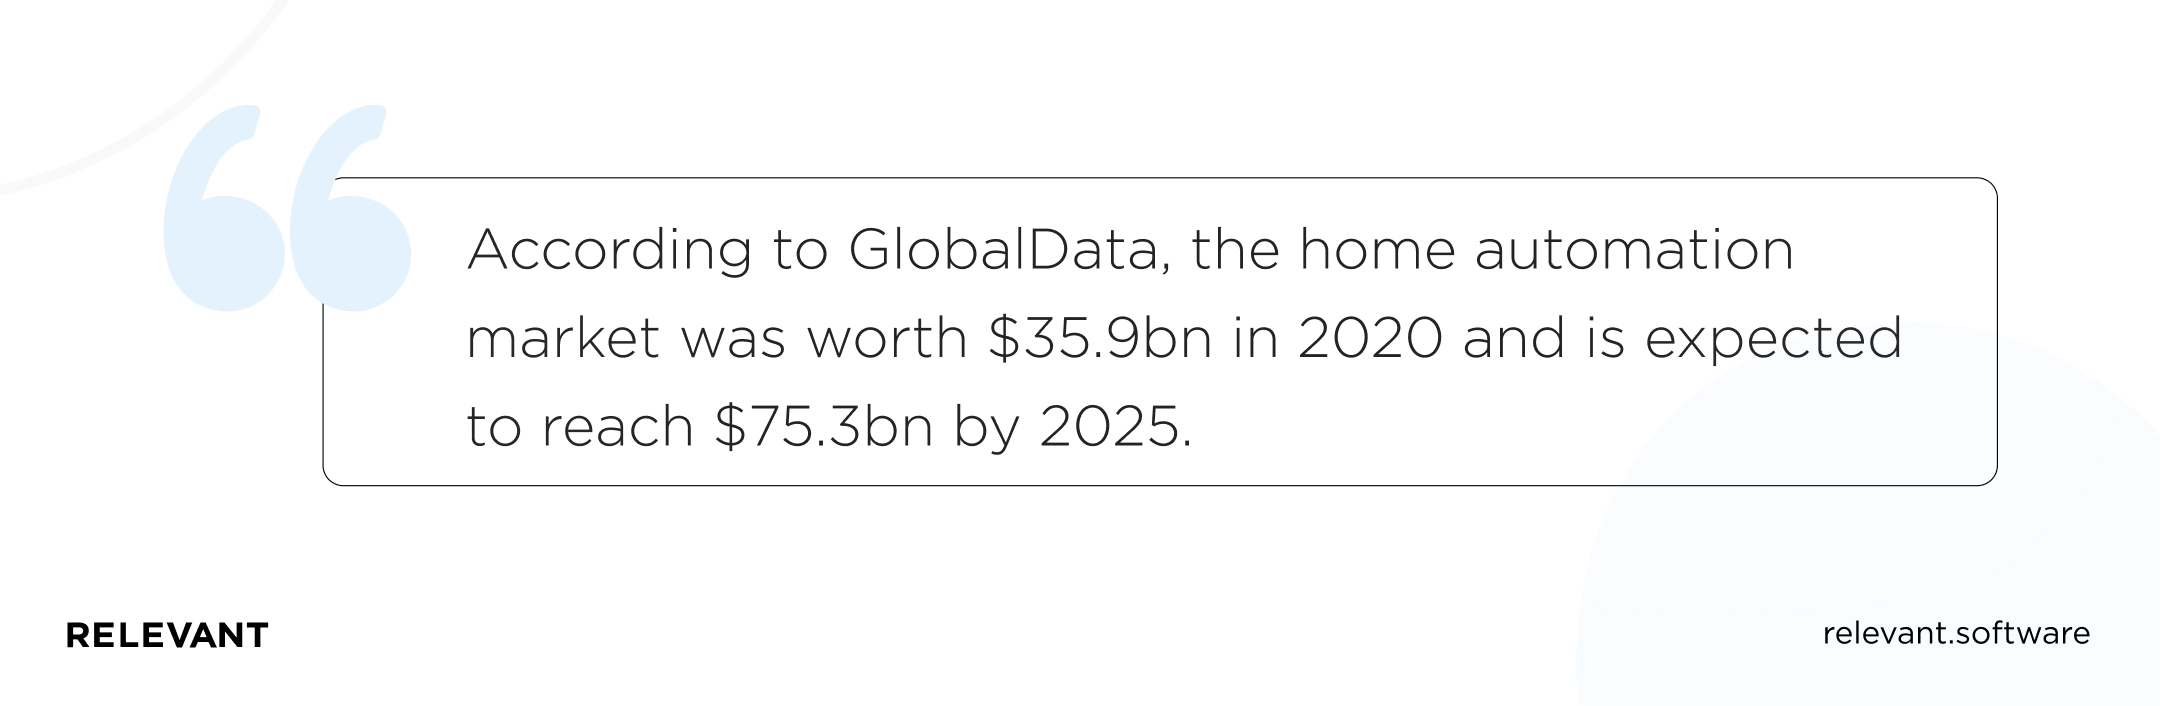 According to GlobalData, the home automation market was worth .9bn in 2020 and is expected to reach .3bn by 2025